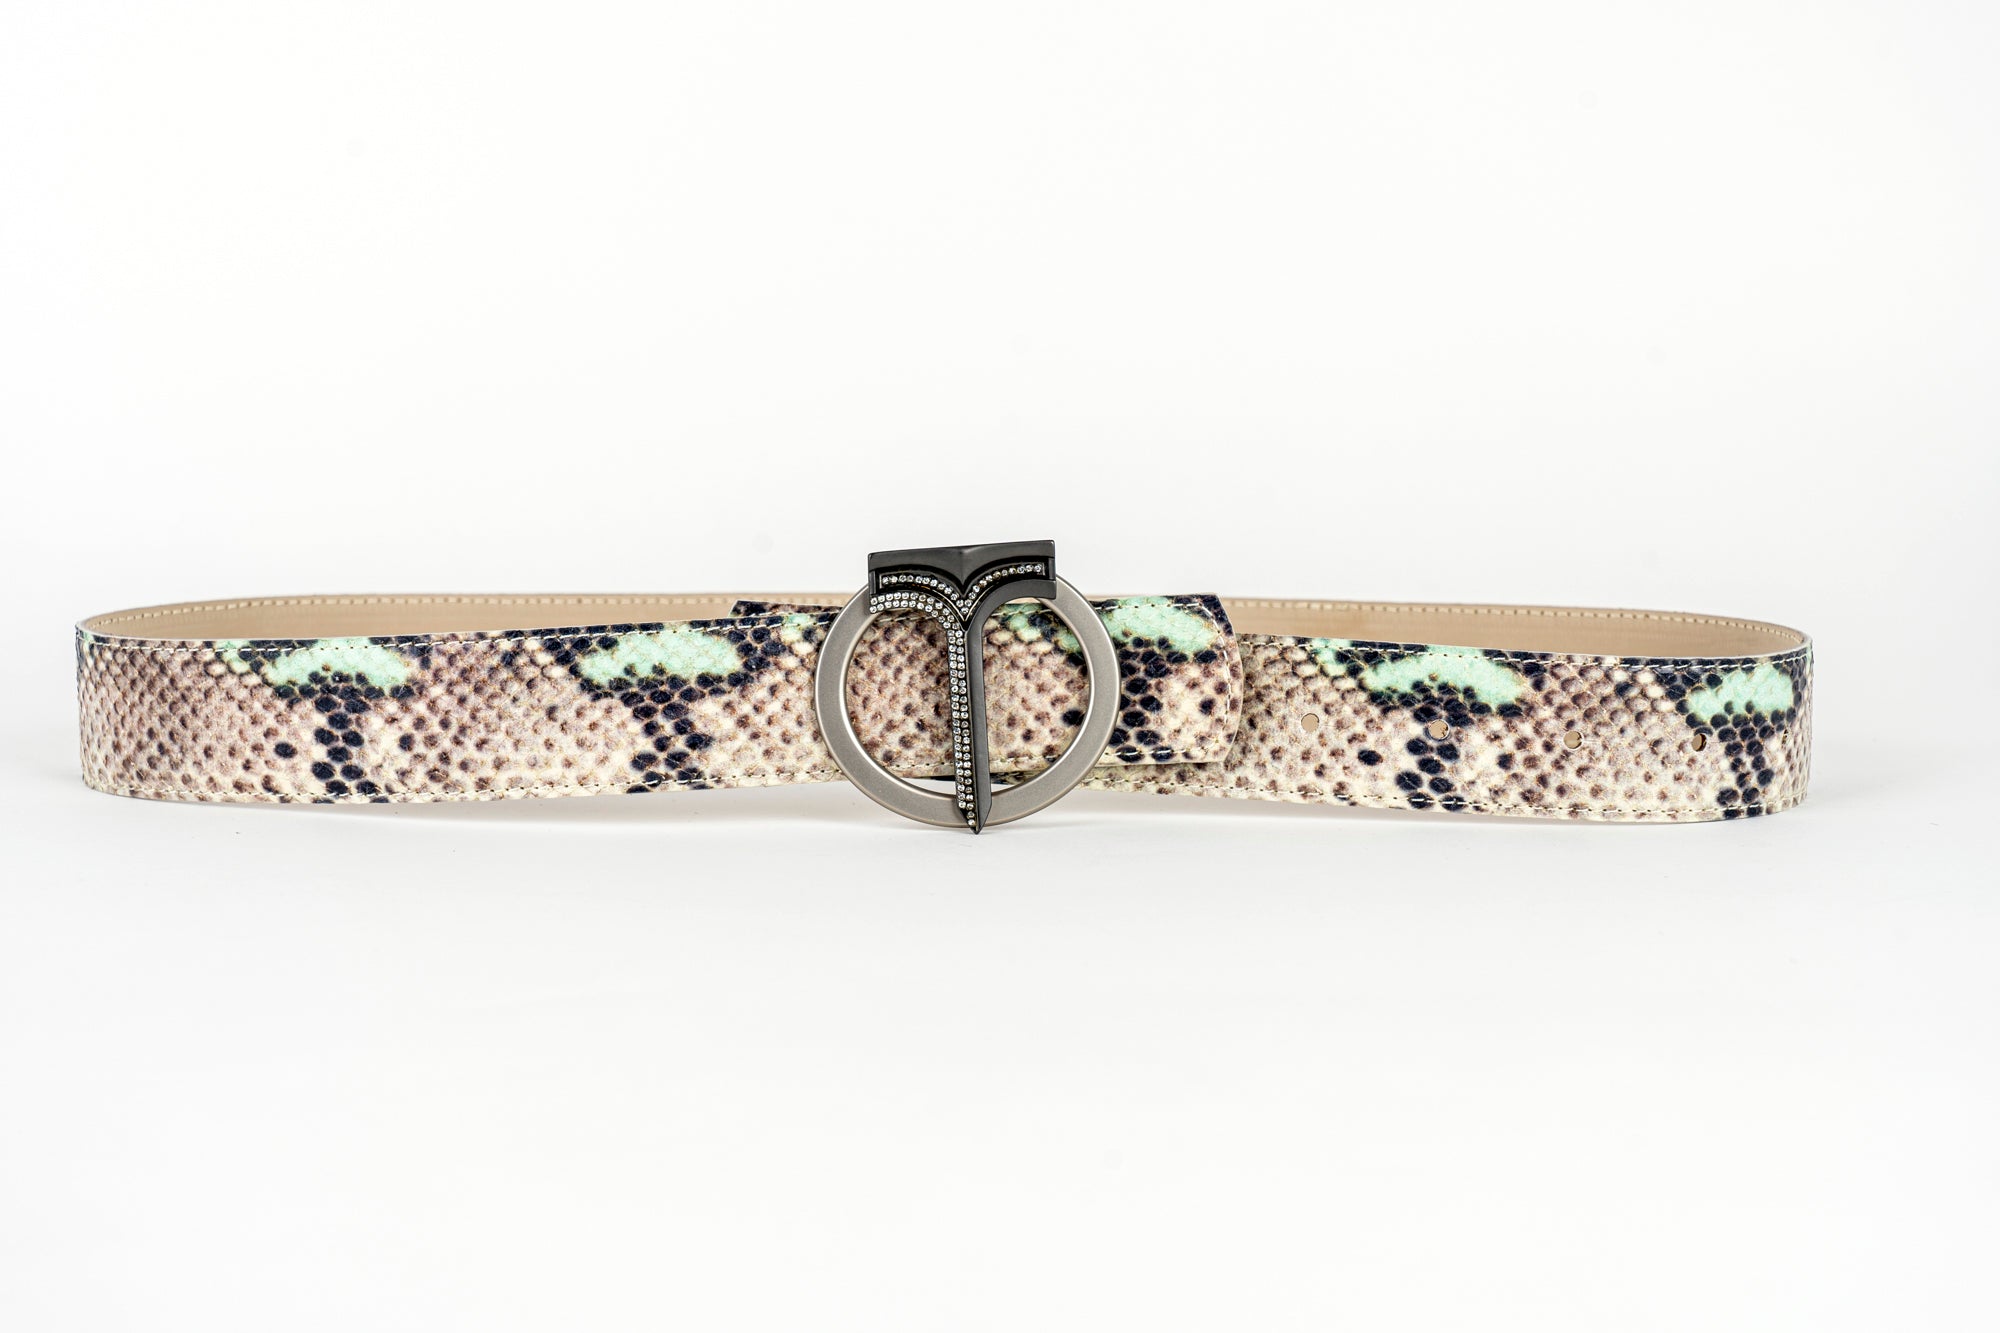 CINTURA IN PELLE DI VITELLO CON STAMPA PITONE Grey and green/ Grey and Green Calf Leather Belt with Python Print